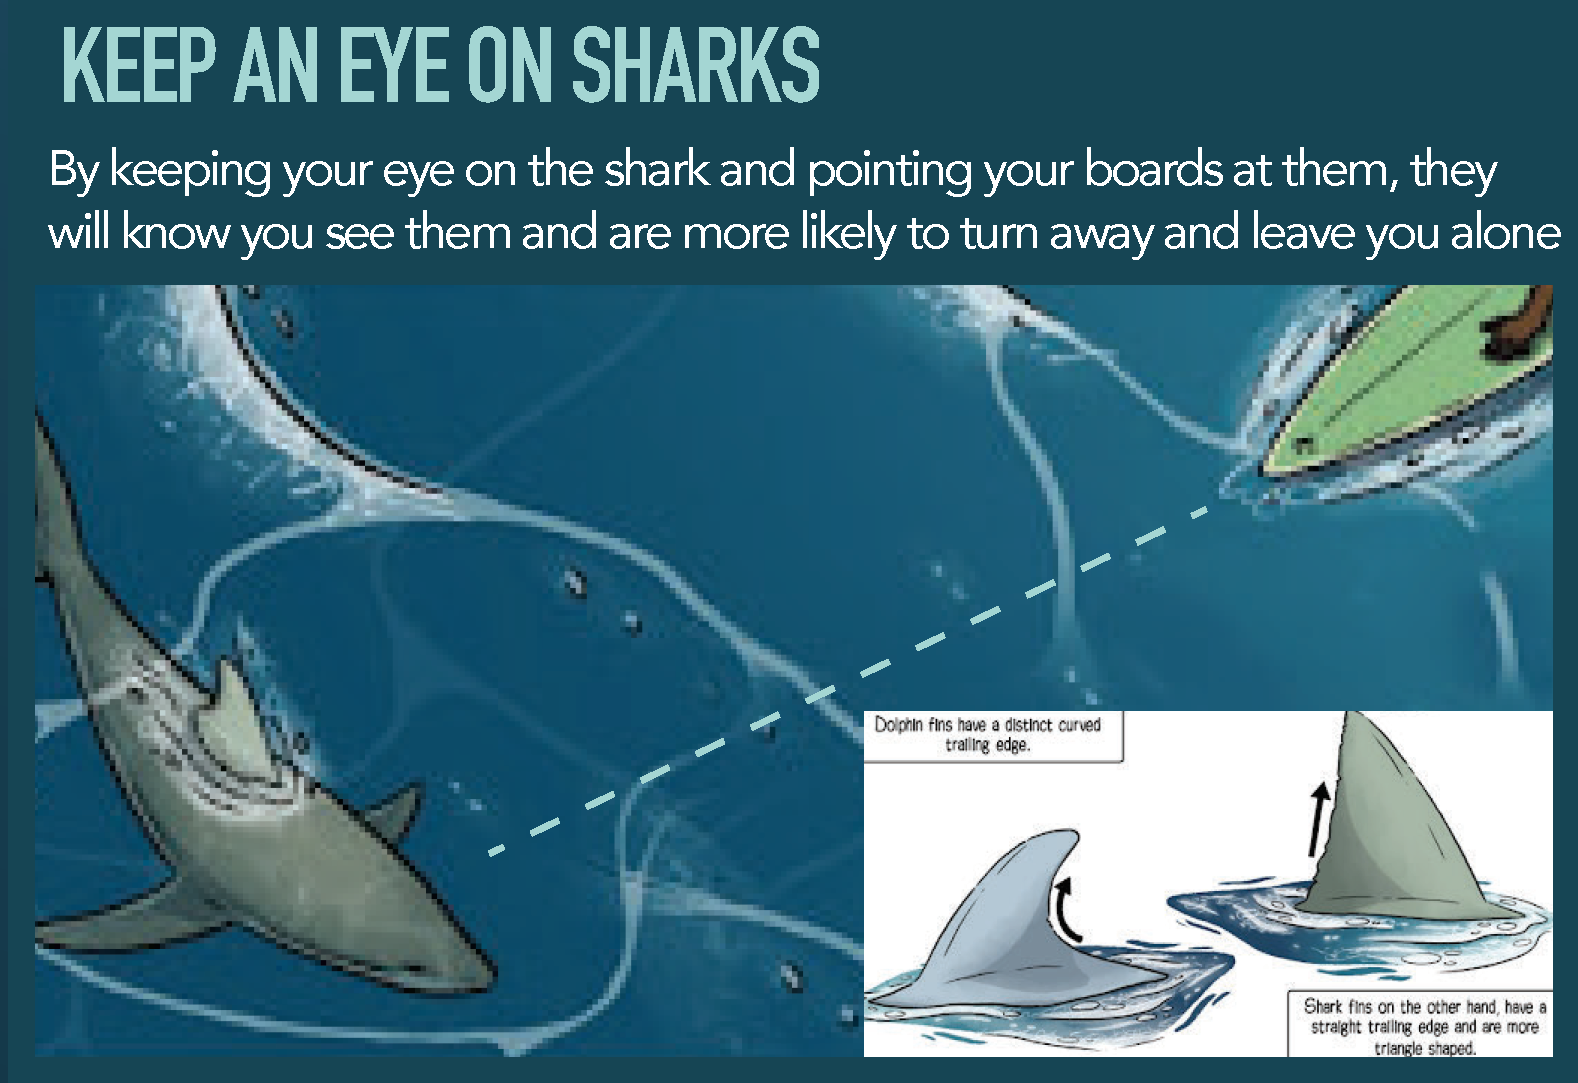 give sharks notice of your presence by pointing your board t